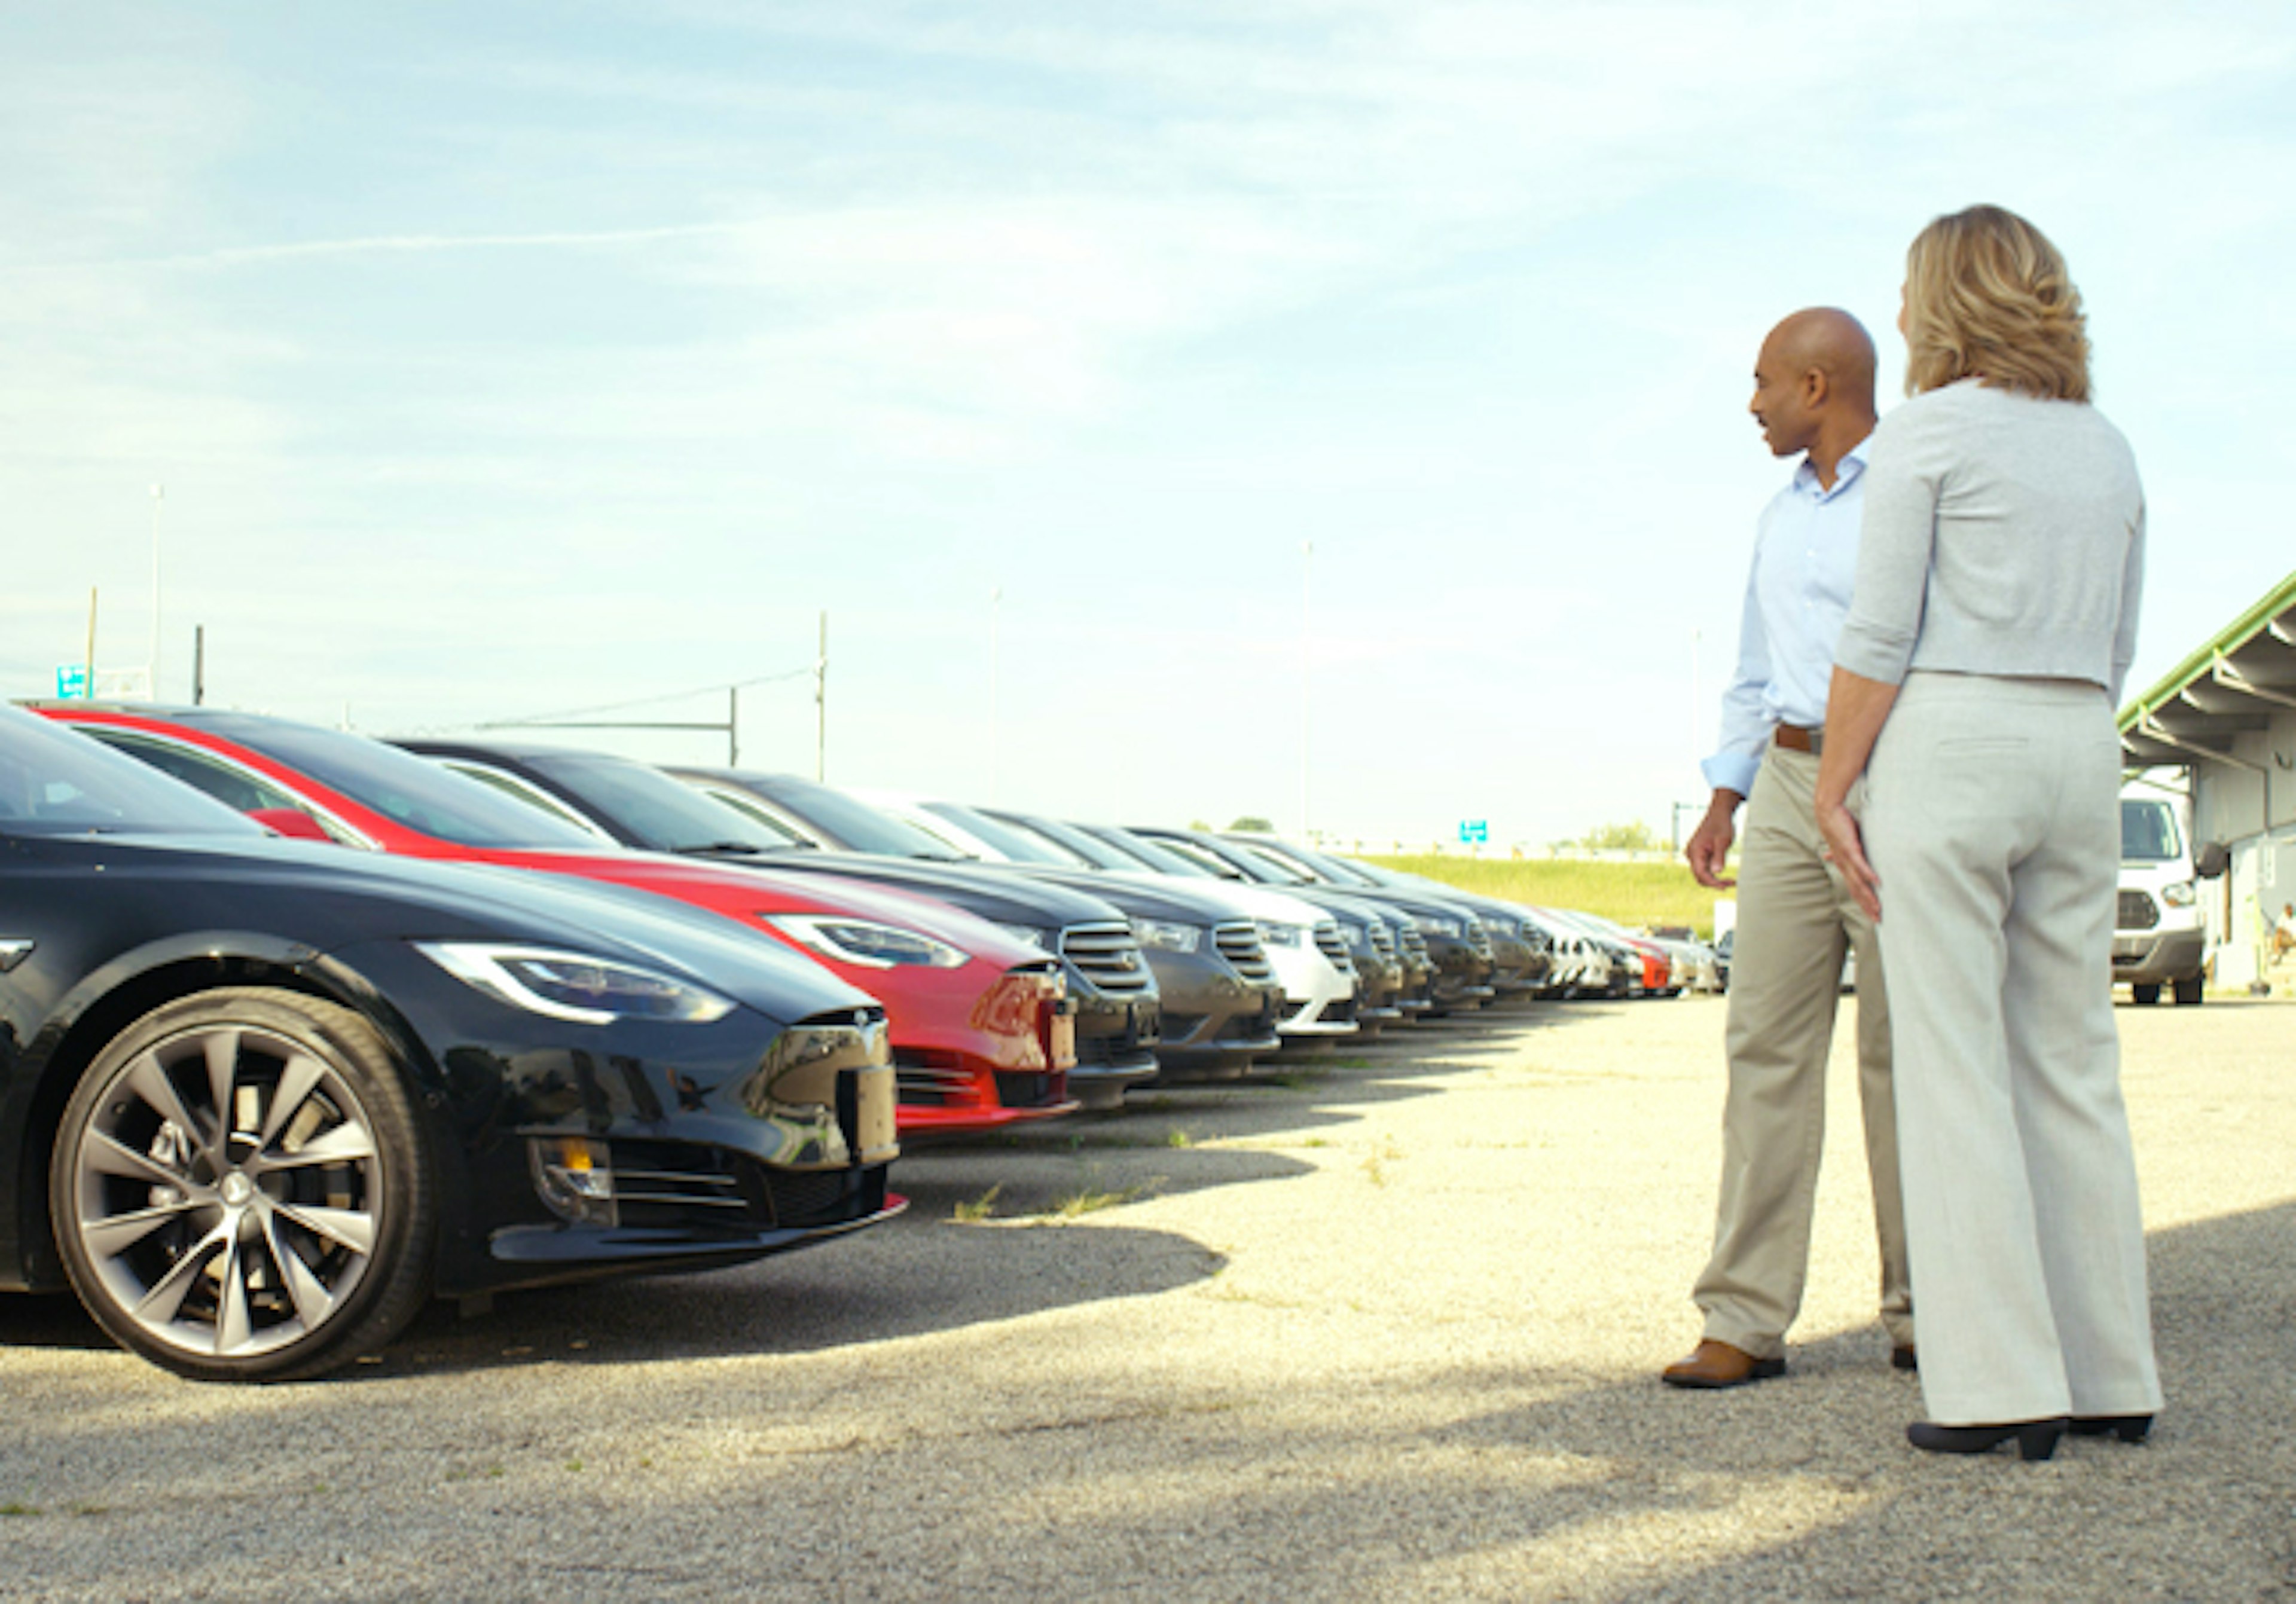 Benefits of closed-end commercial fleet lease